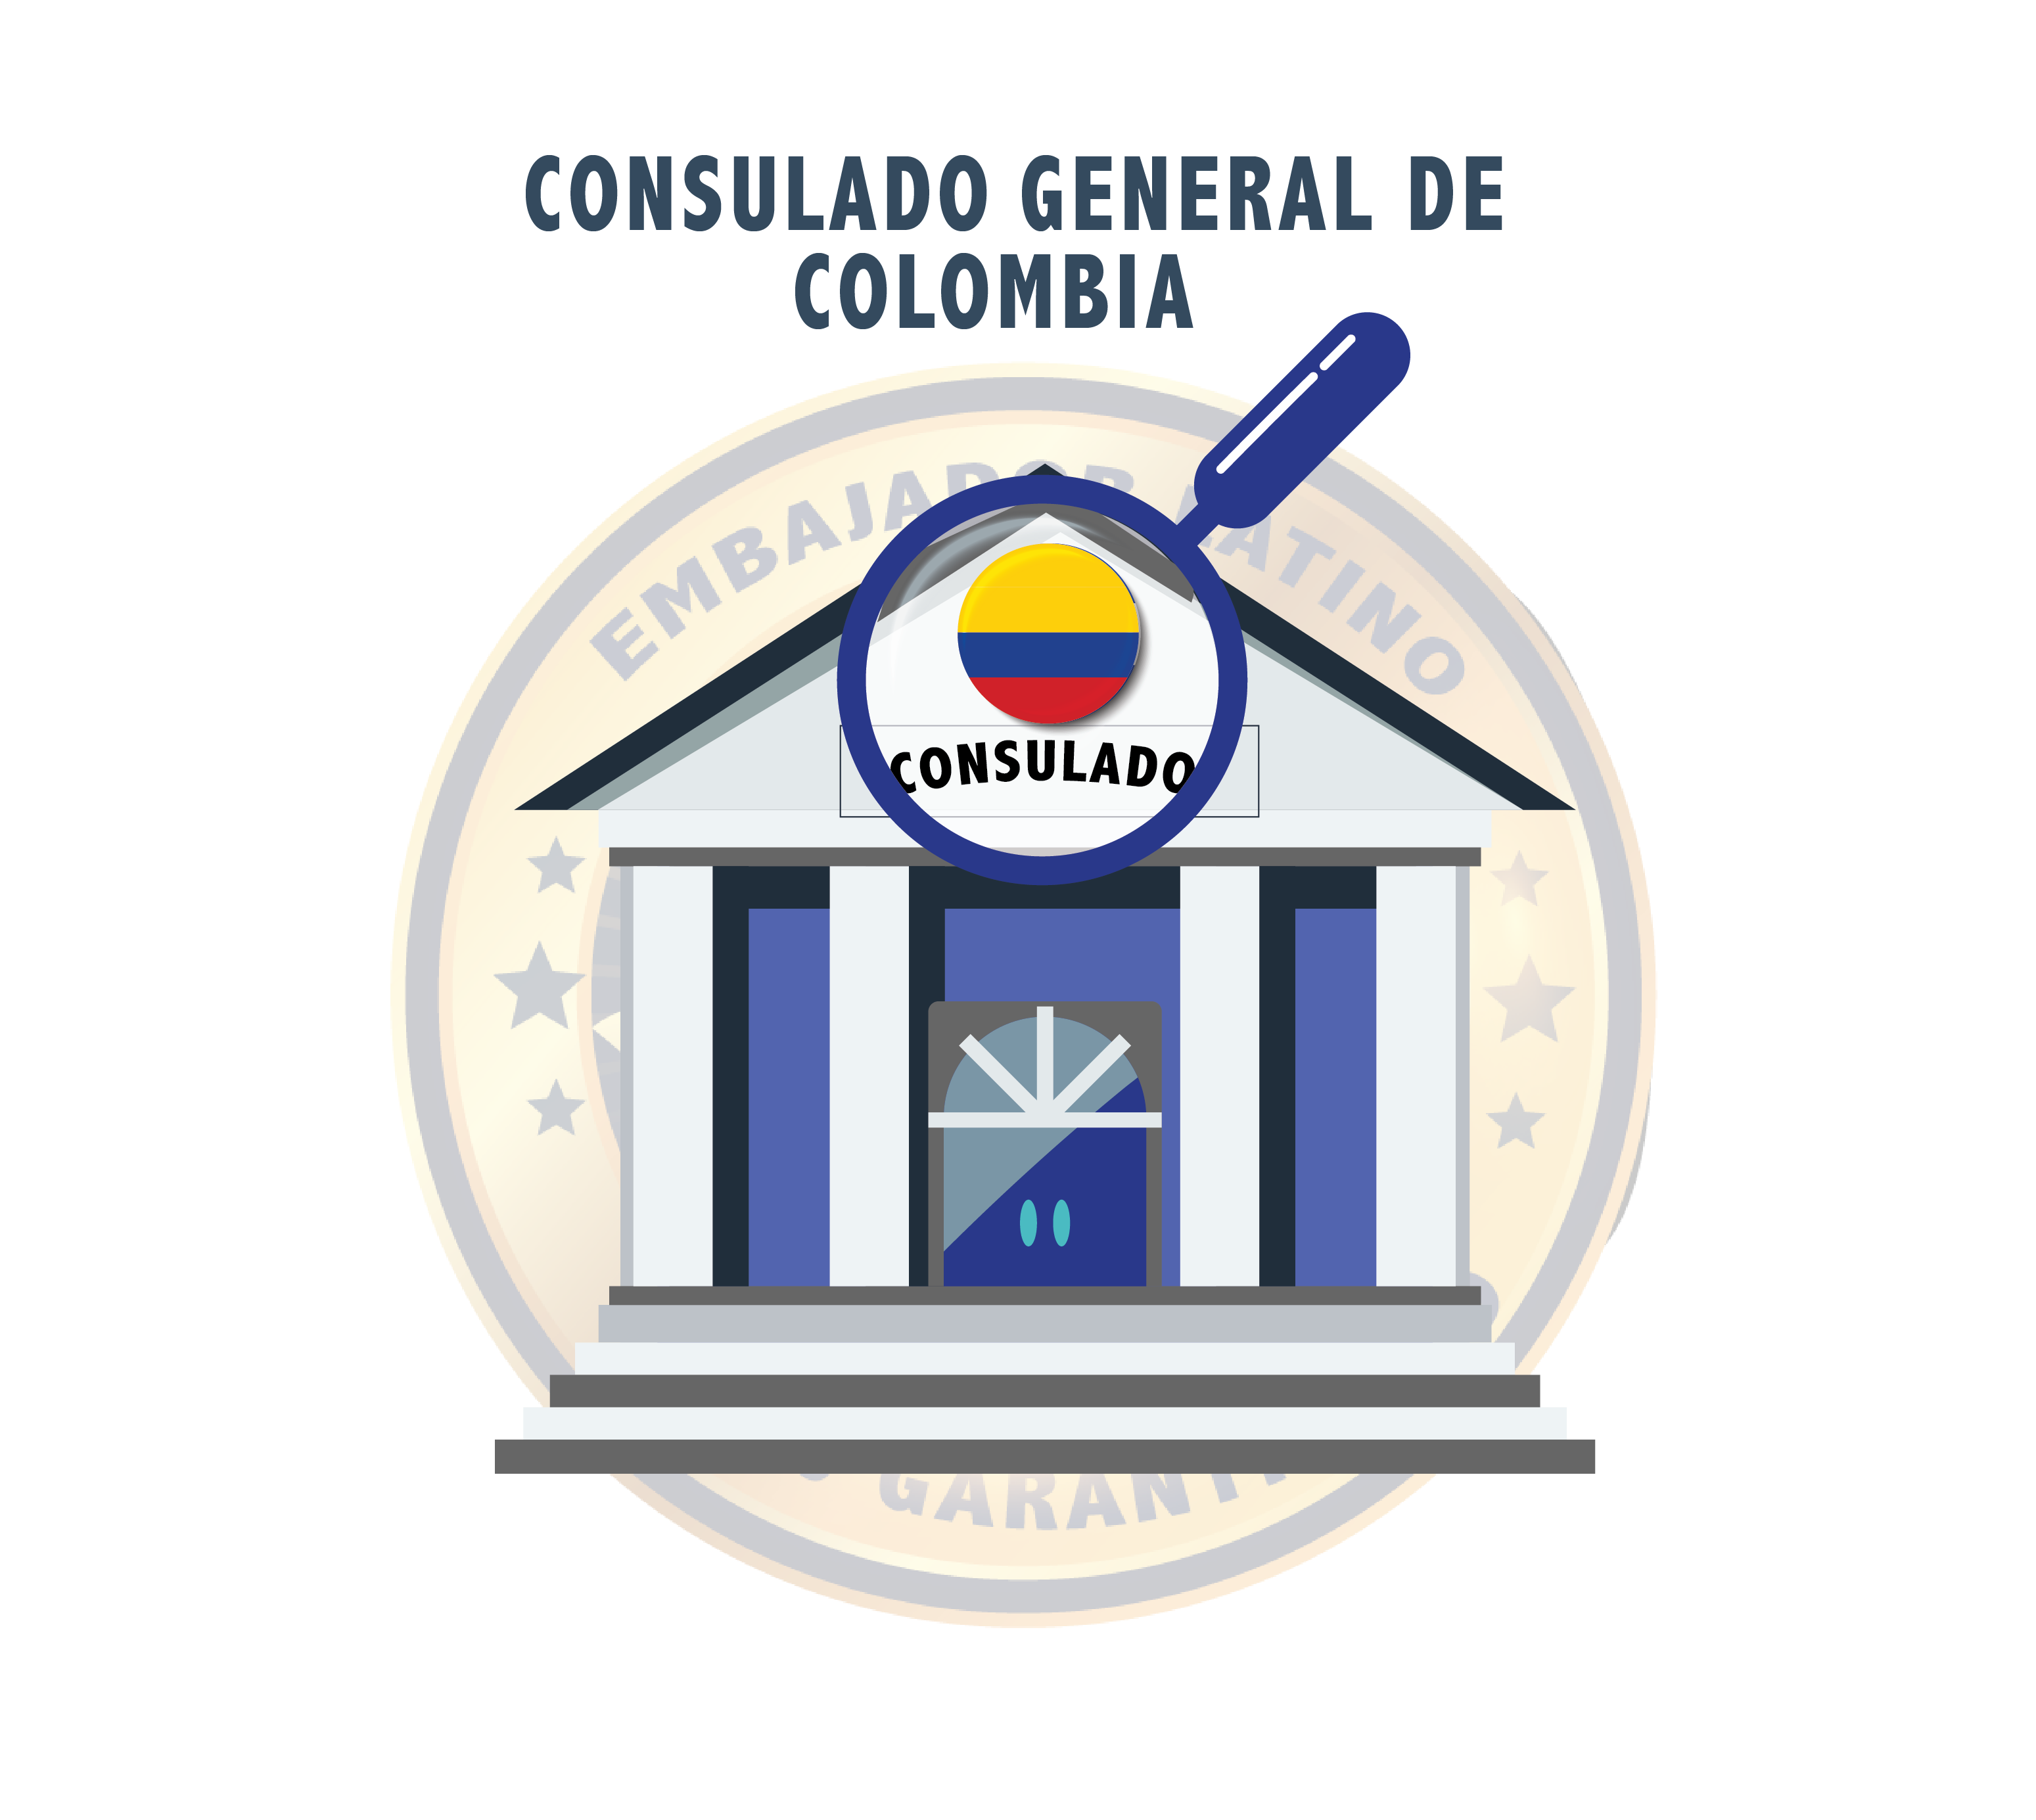 Consulate General of Colombia